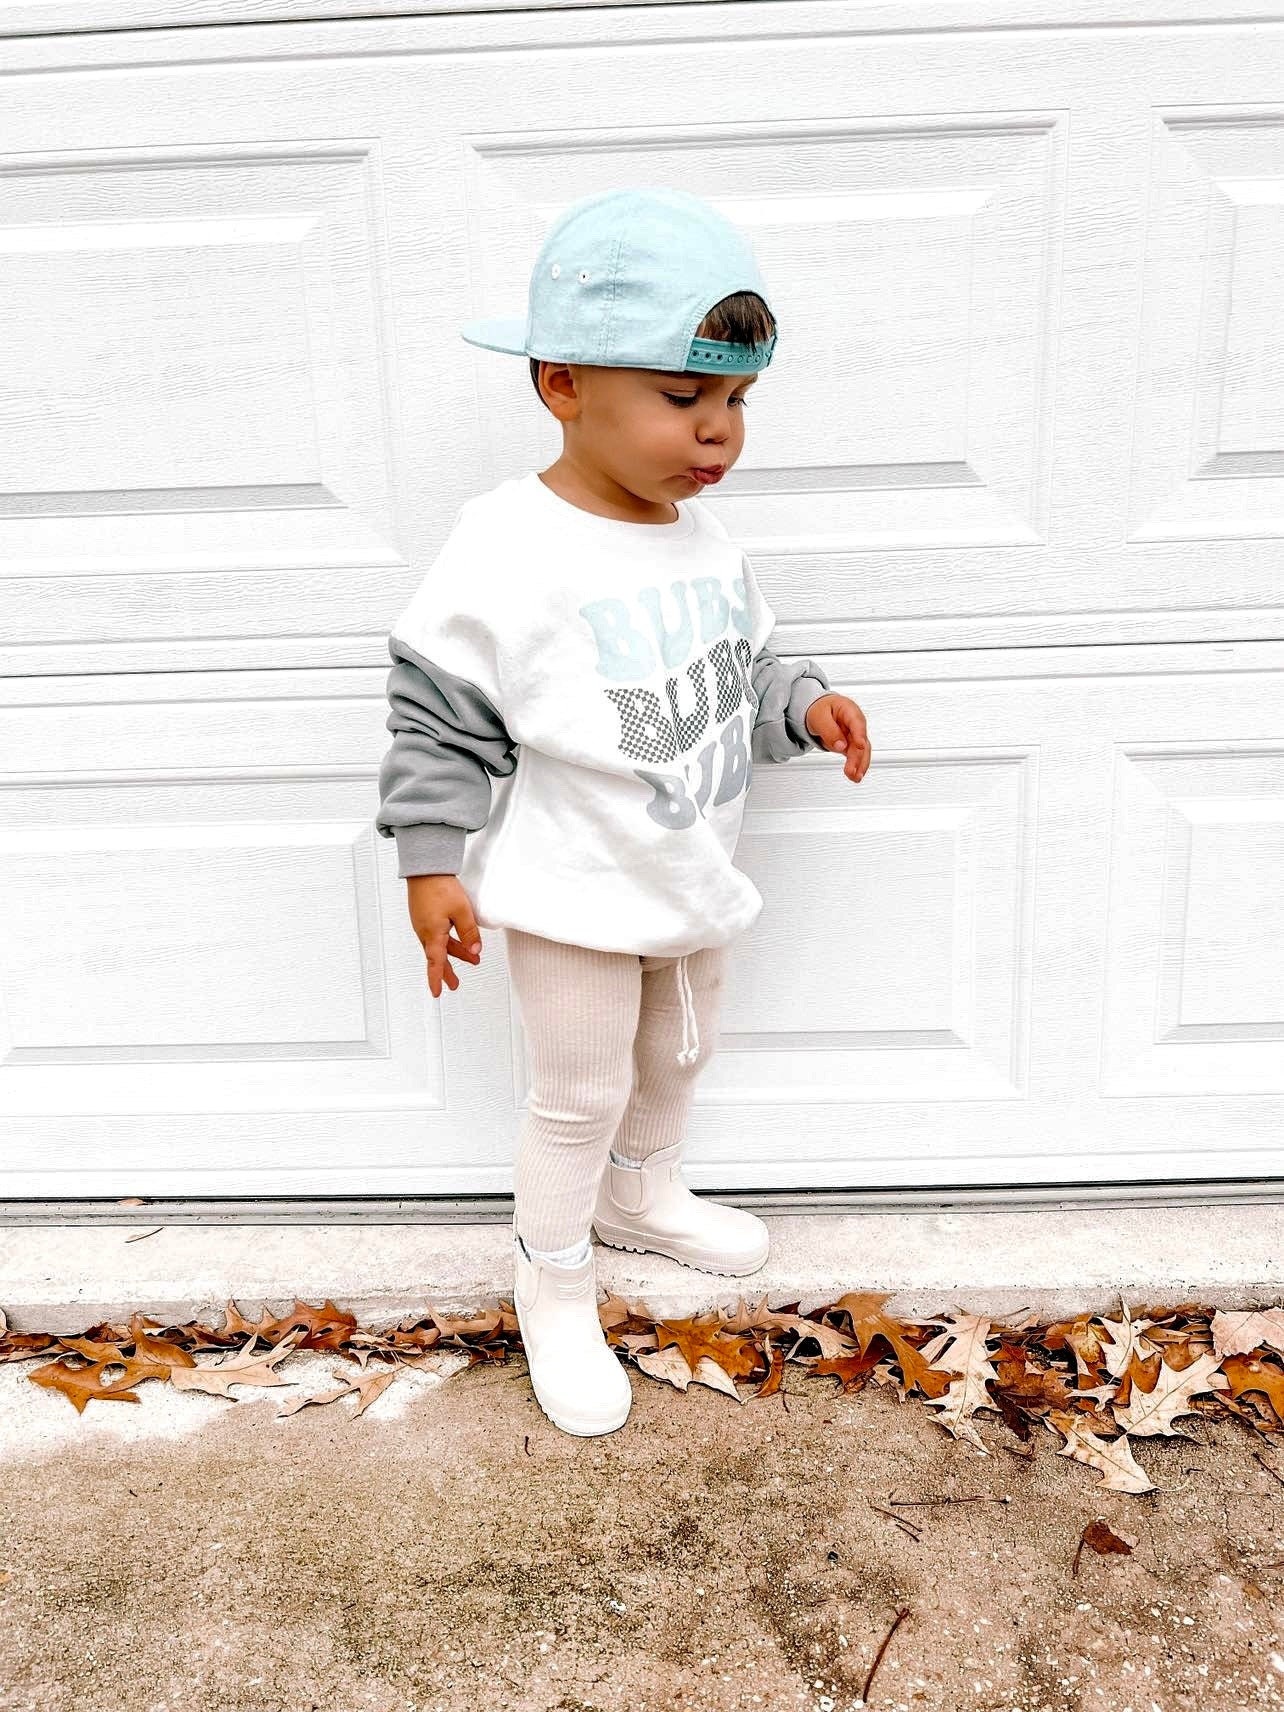 Pin by yesica hernandez on Boy outfits  Baby boy outfits swag, Baby boy  winter outfits, Cute baby boy outfits